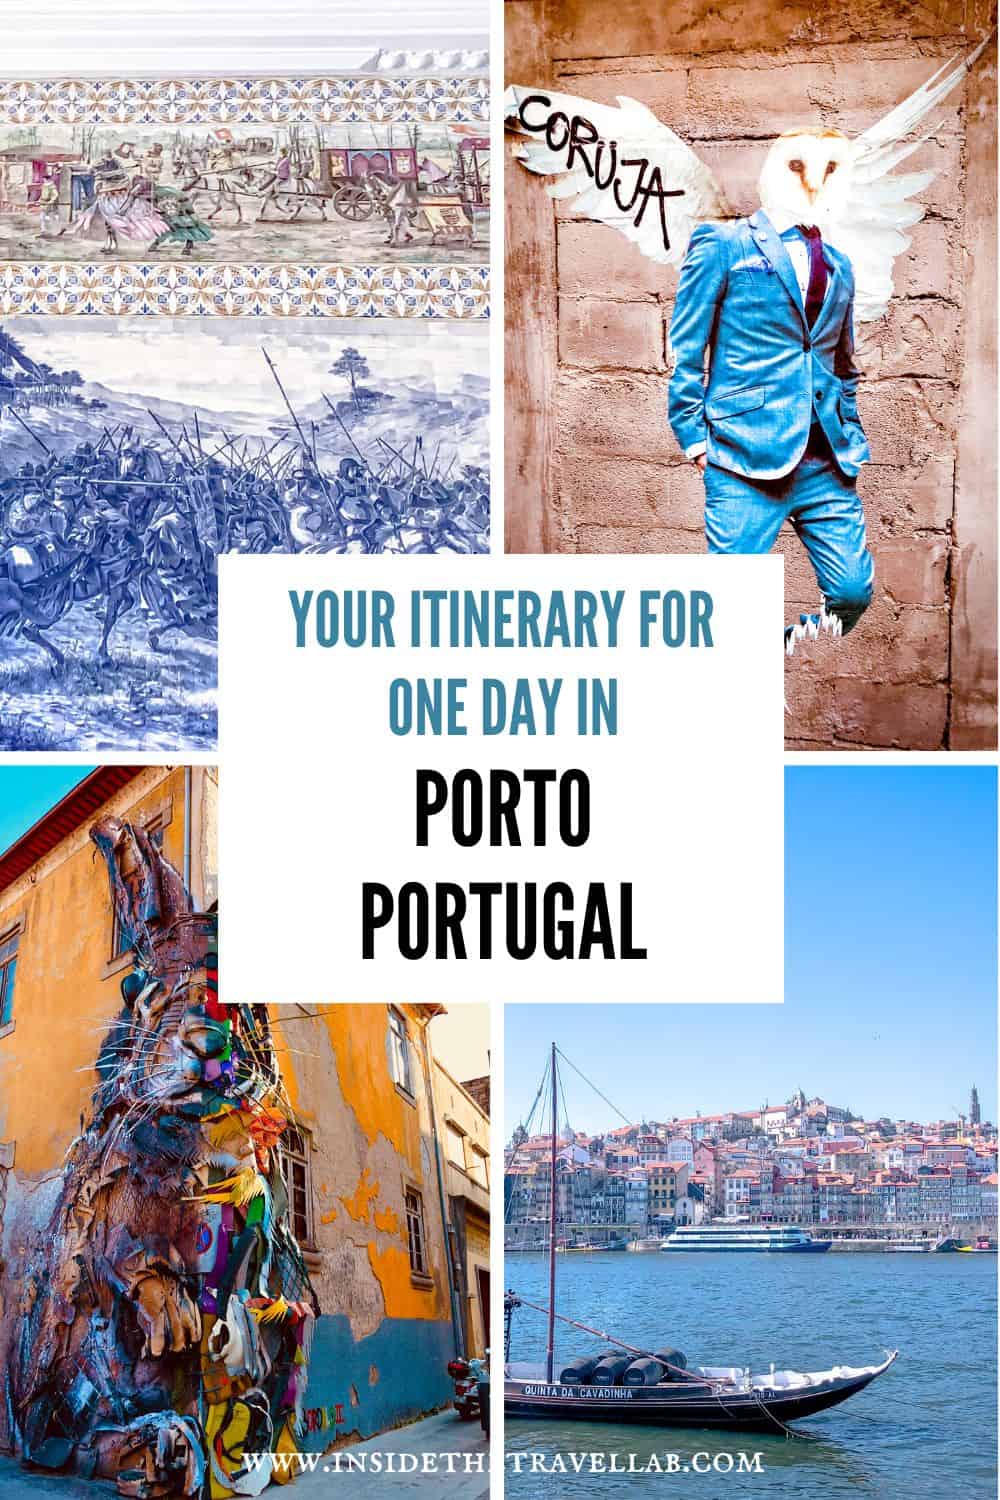 One day in Porto Portugal cover image for Pinterest with four photos from the city